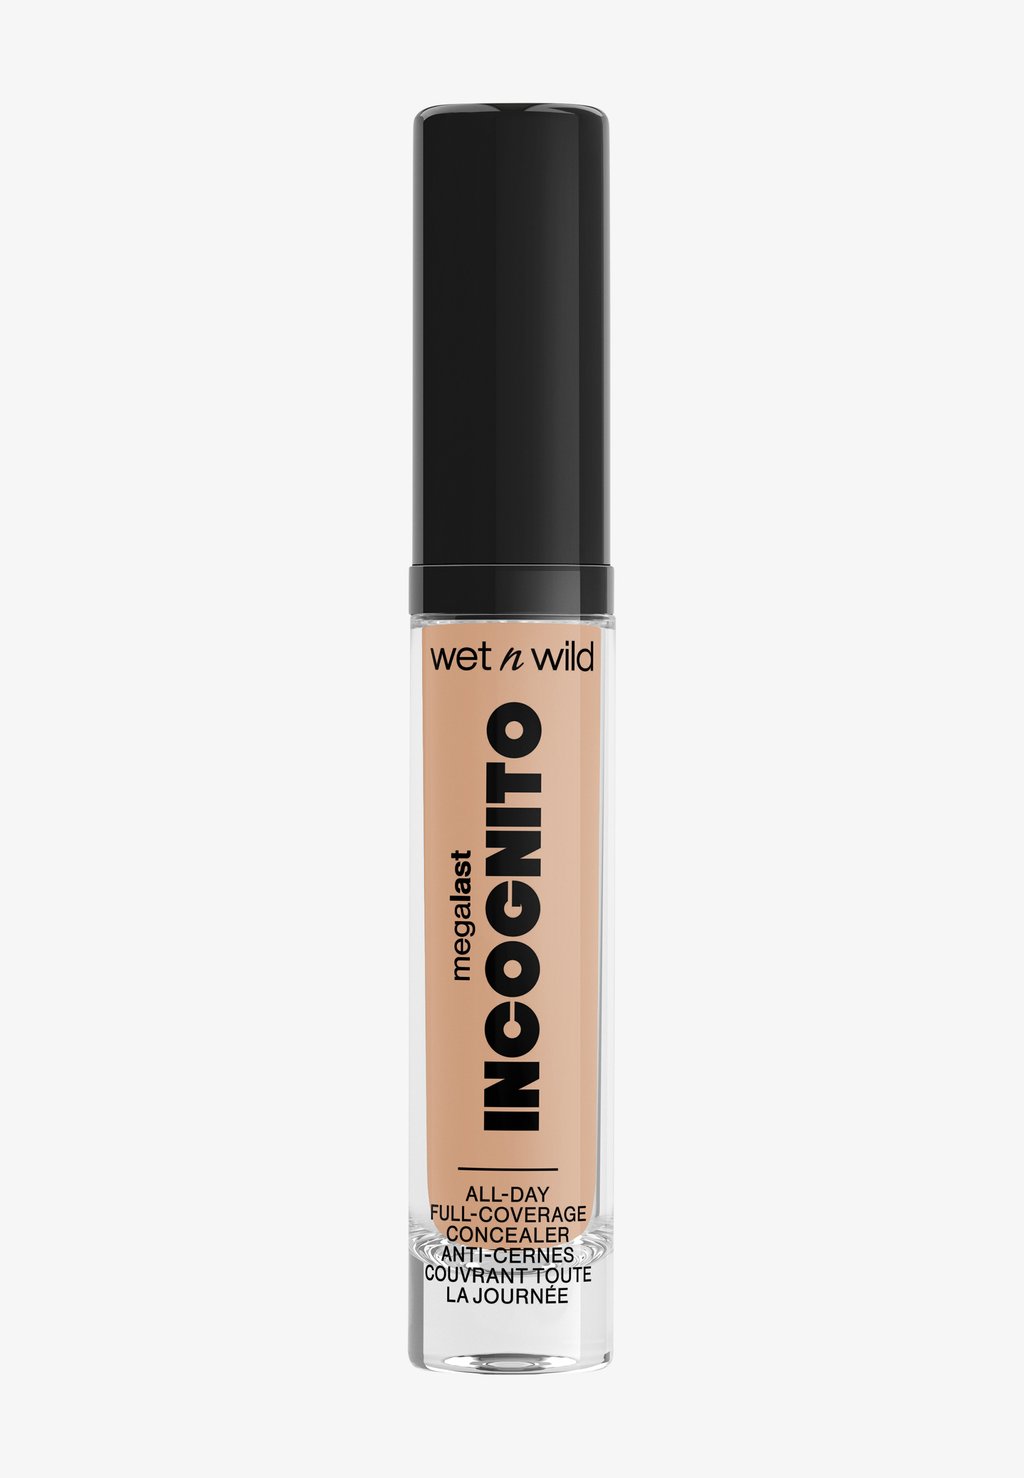 Консилер Megalast Incognito All-Day Full Coverage Concealer WET N WILD, цвет medium neutral